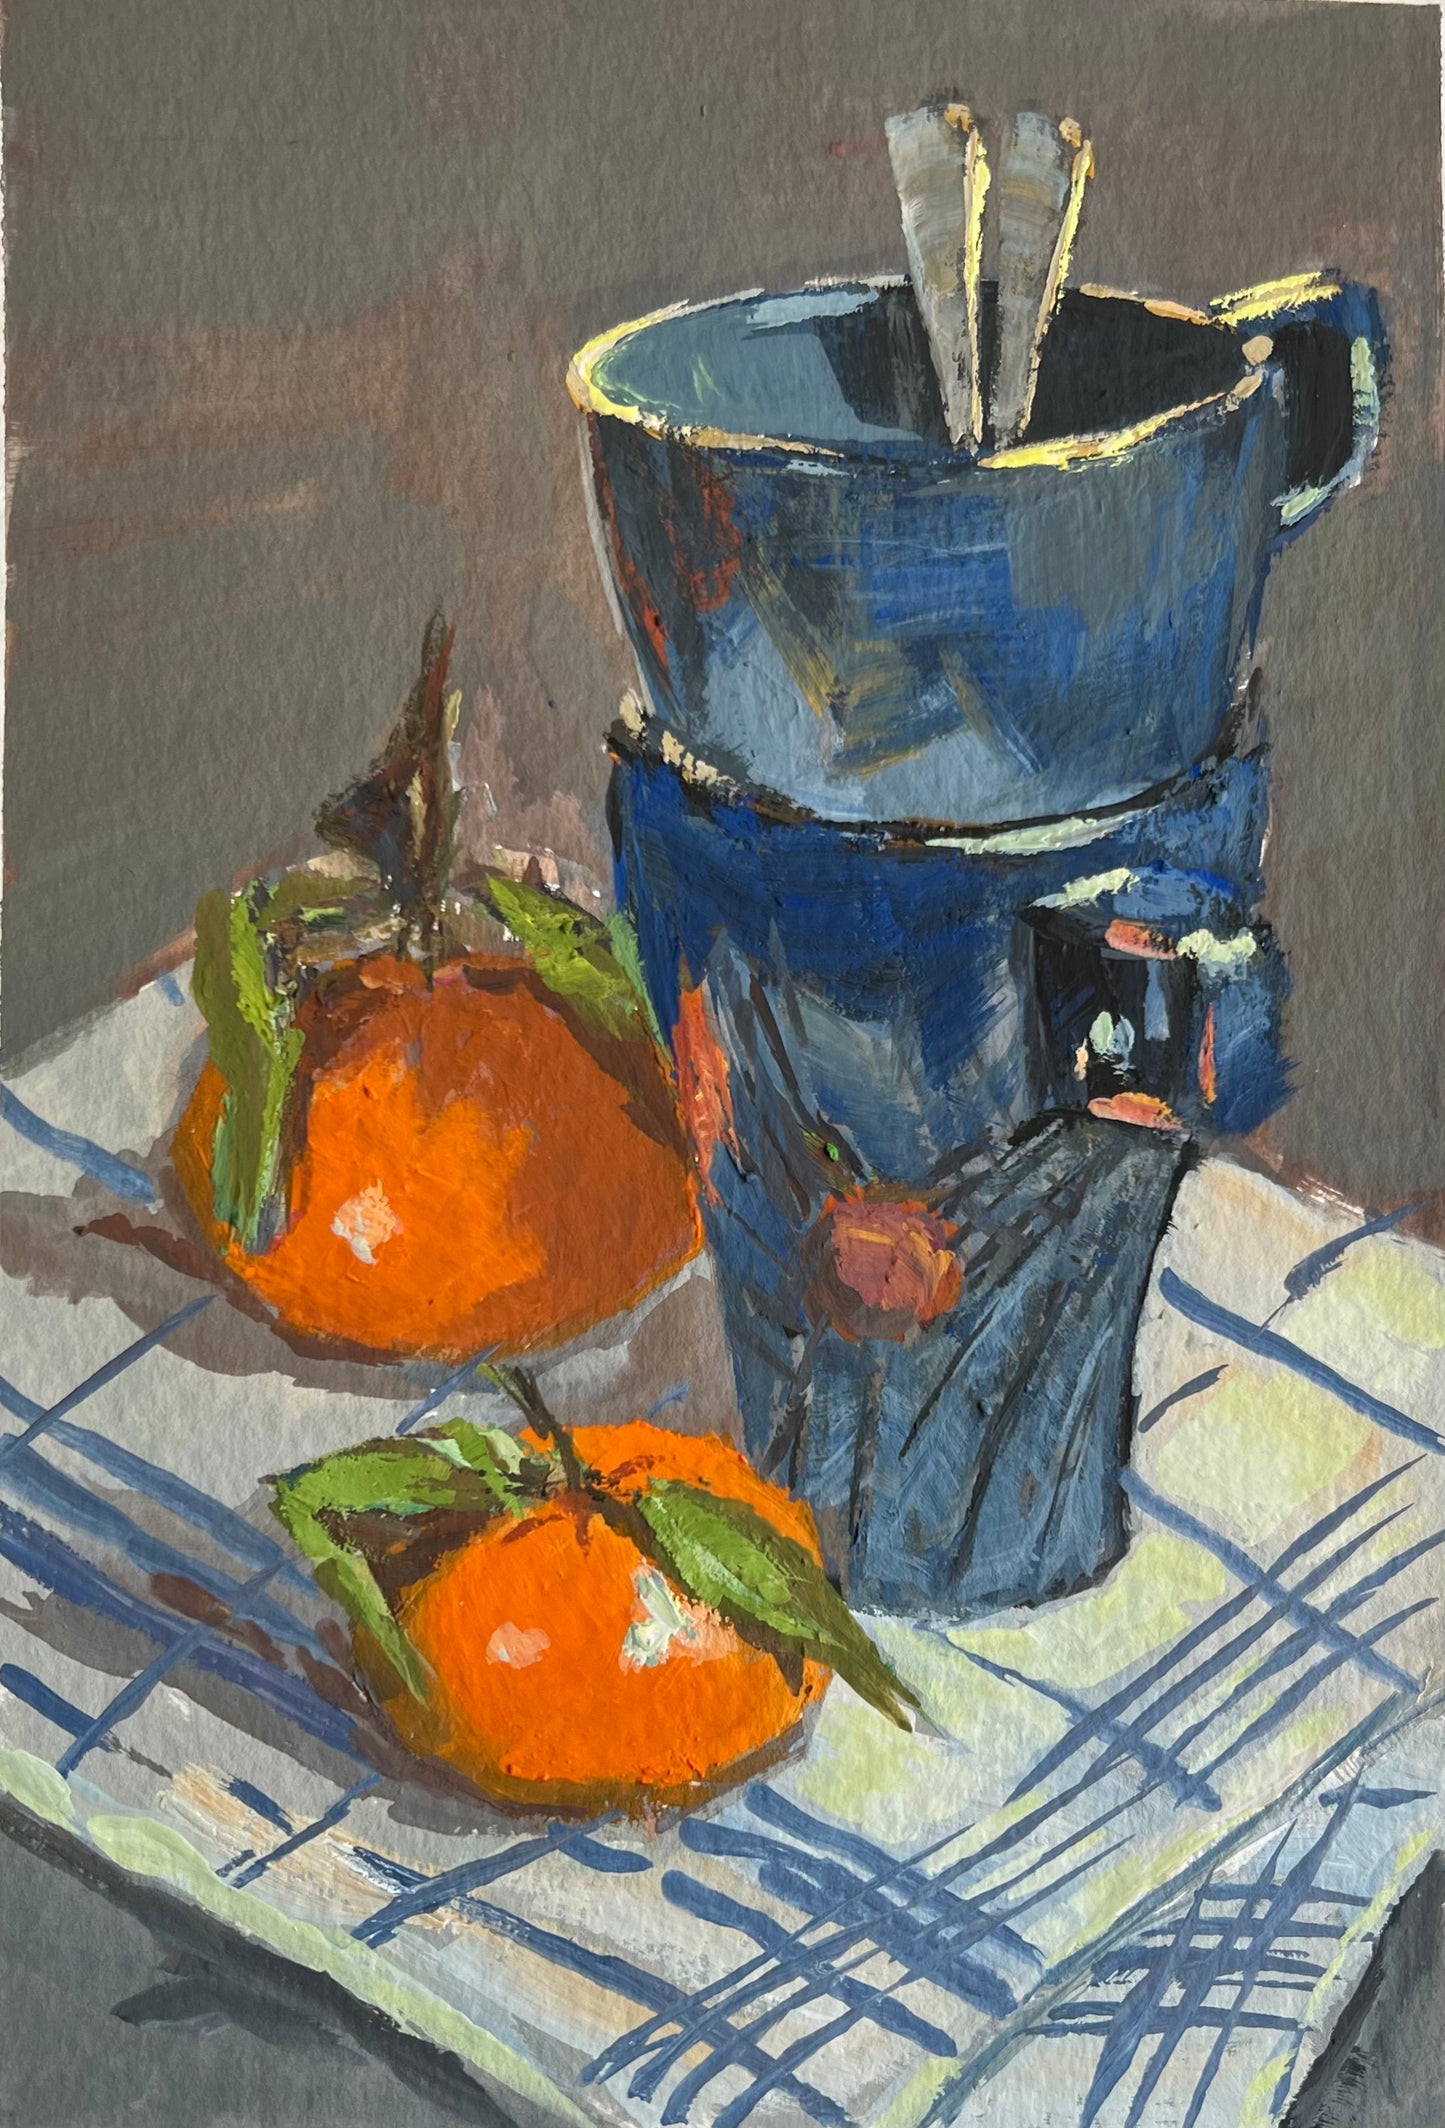 Coffee mugs and oranges in gouache